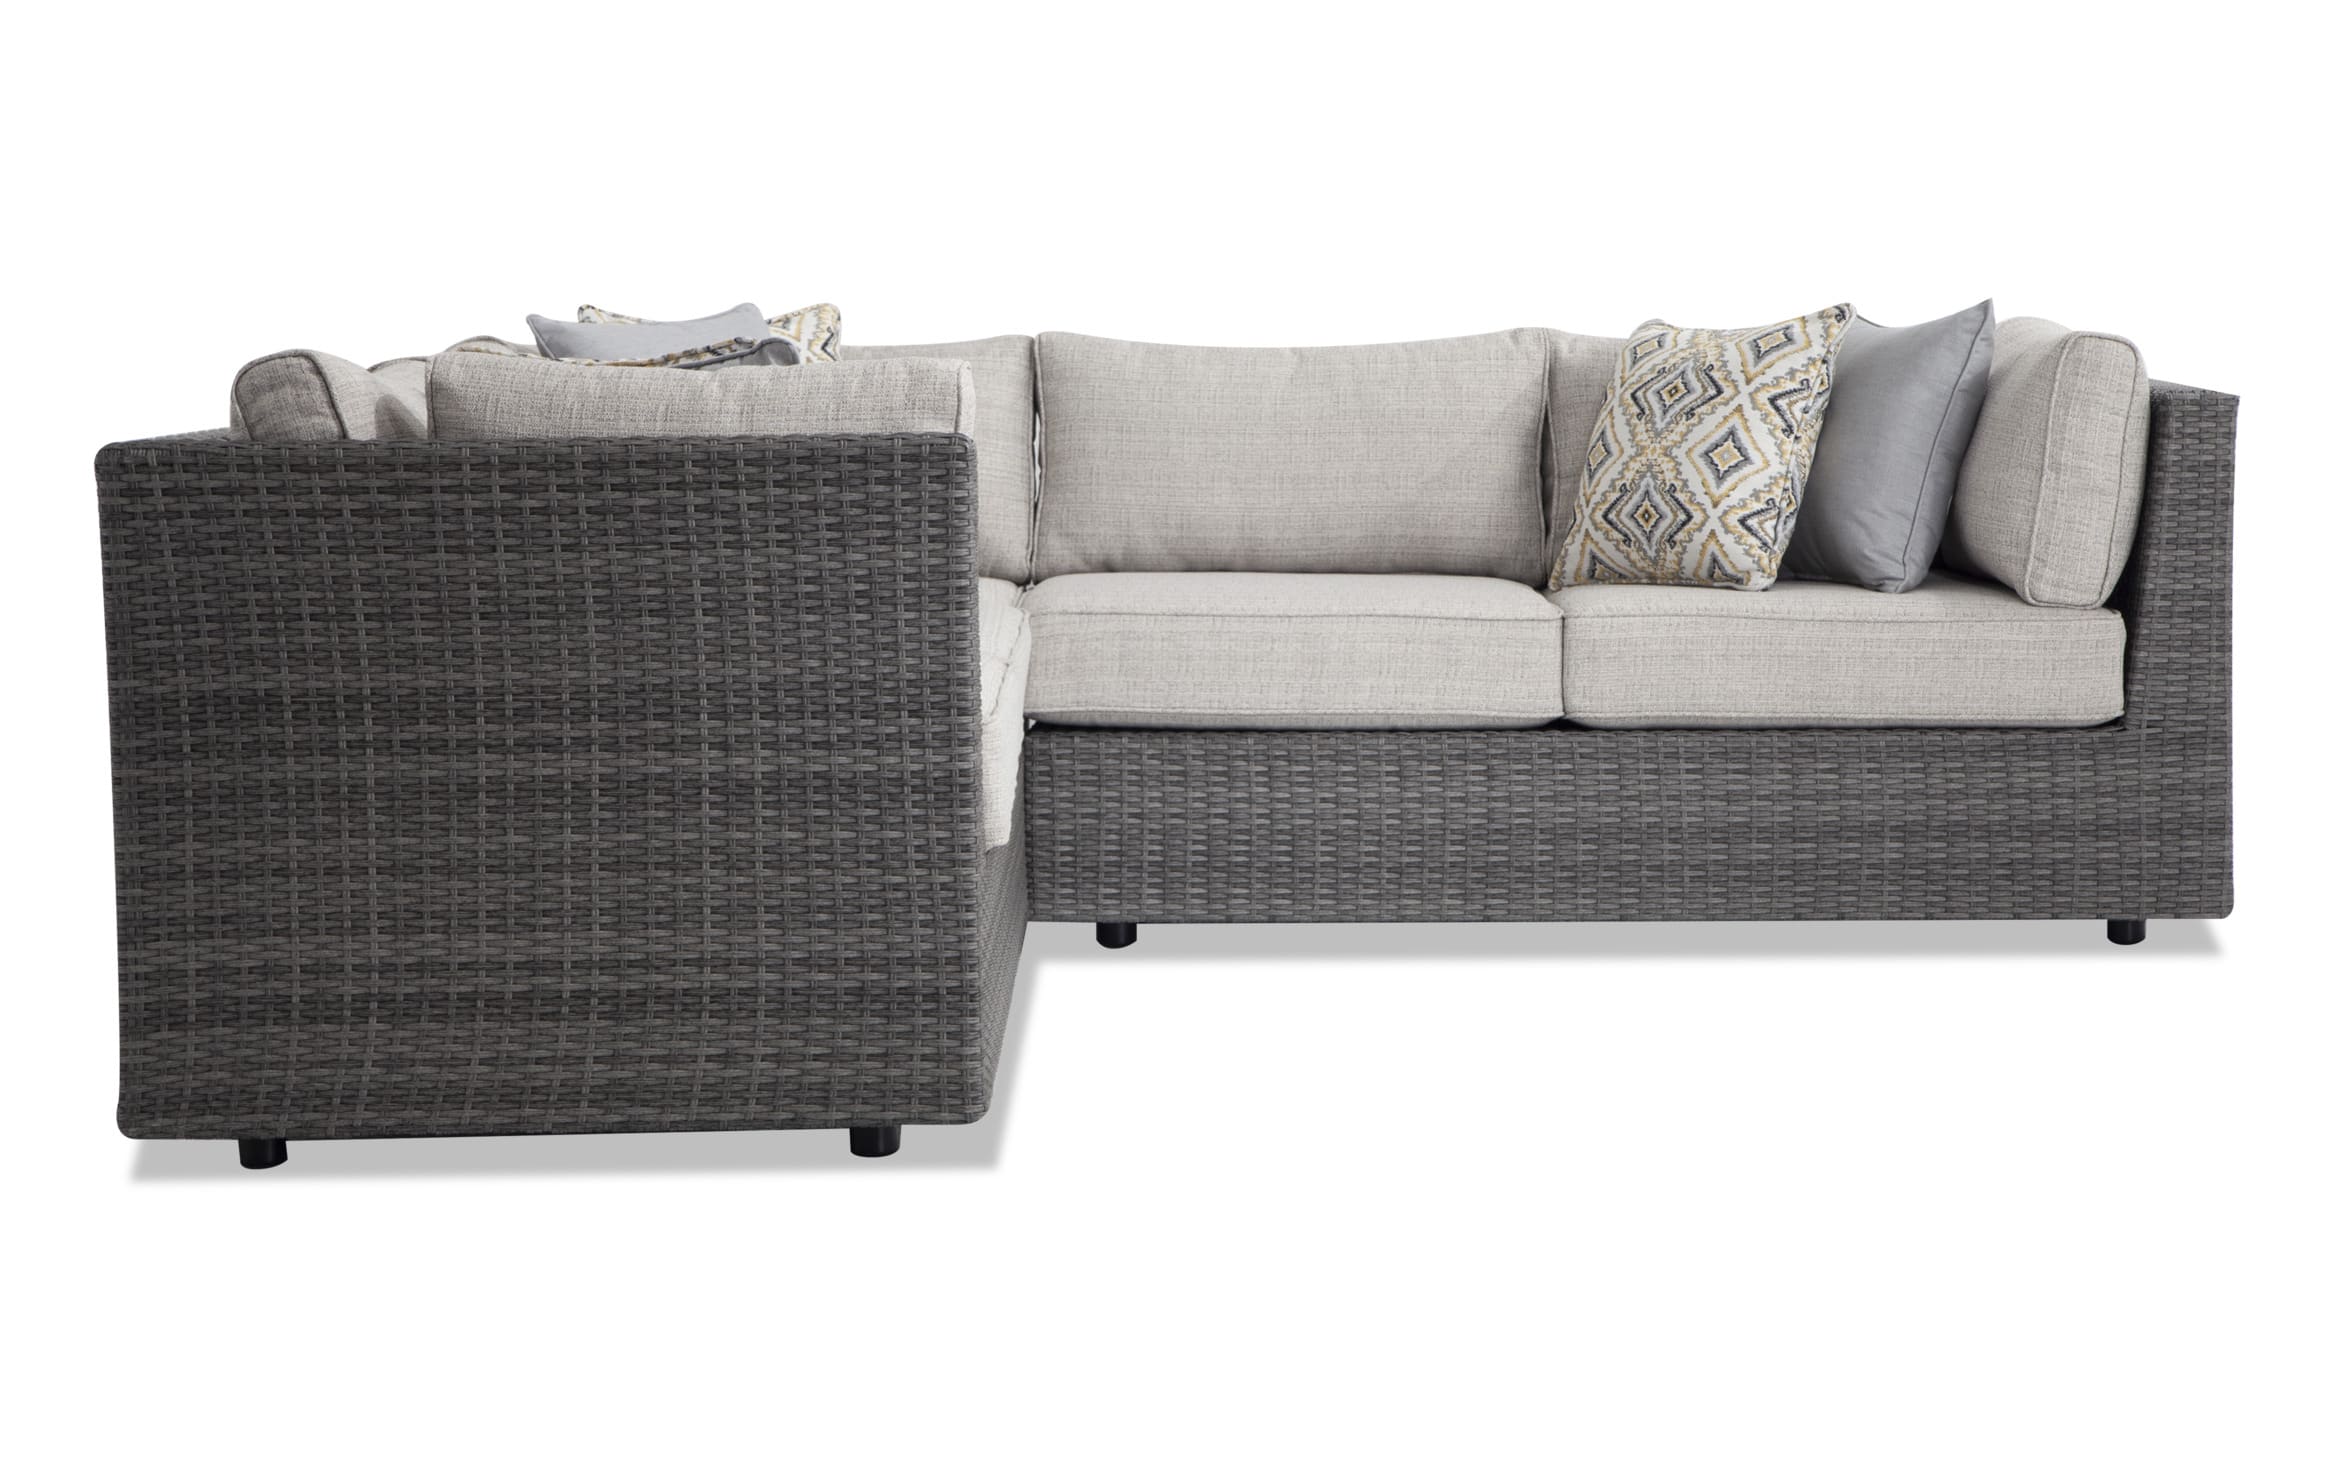 Laurel 3 Piece Outdoor Sectional With, How To Cover Outdoor Sectional